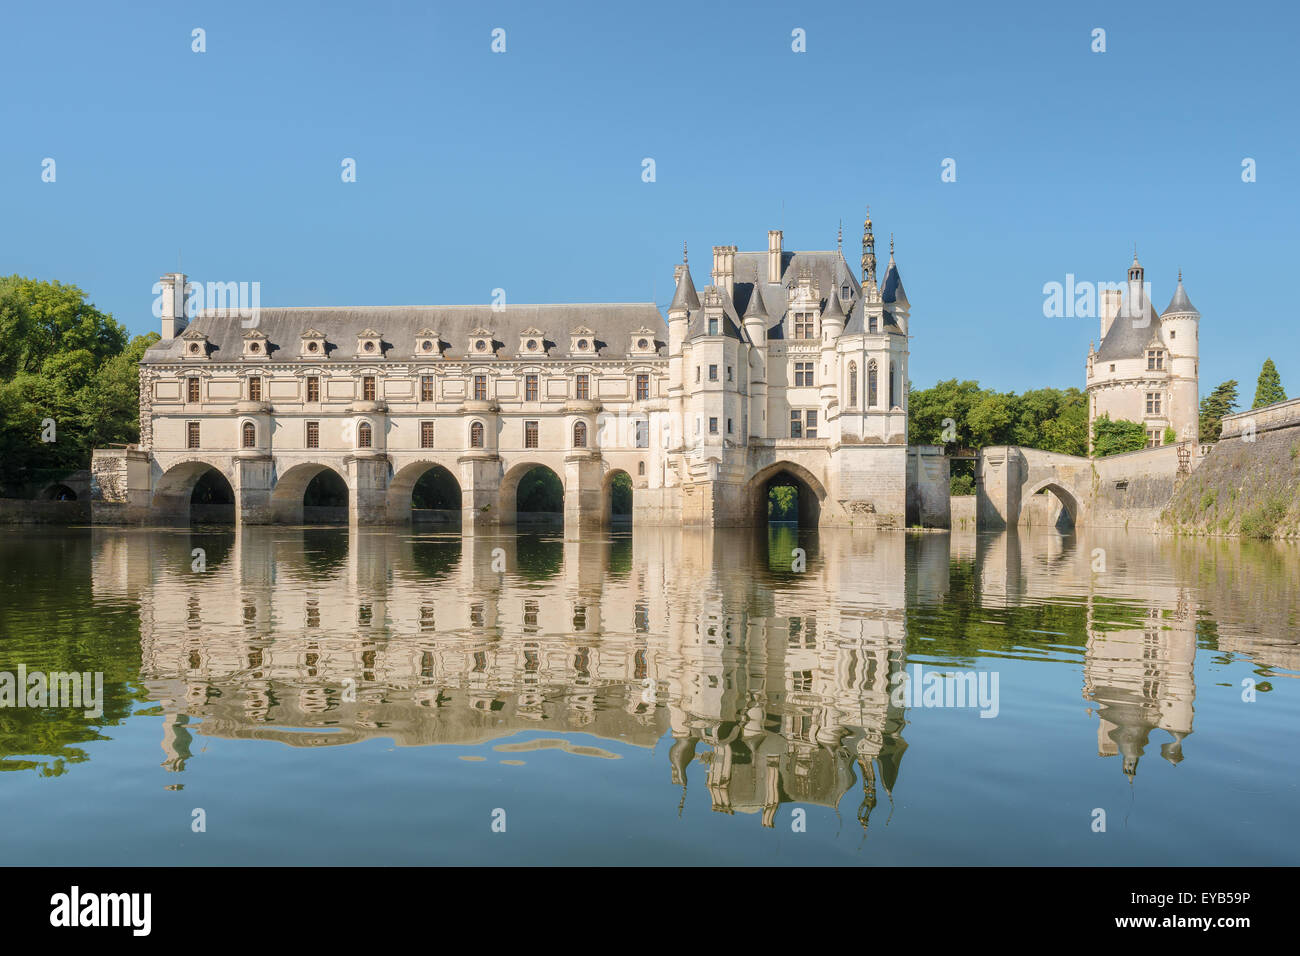 Chenonceau castle, built over the Cher river , Loire Valley,France, view from the river, on gradient blue sky background. Stock Photo